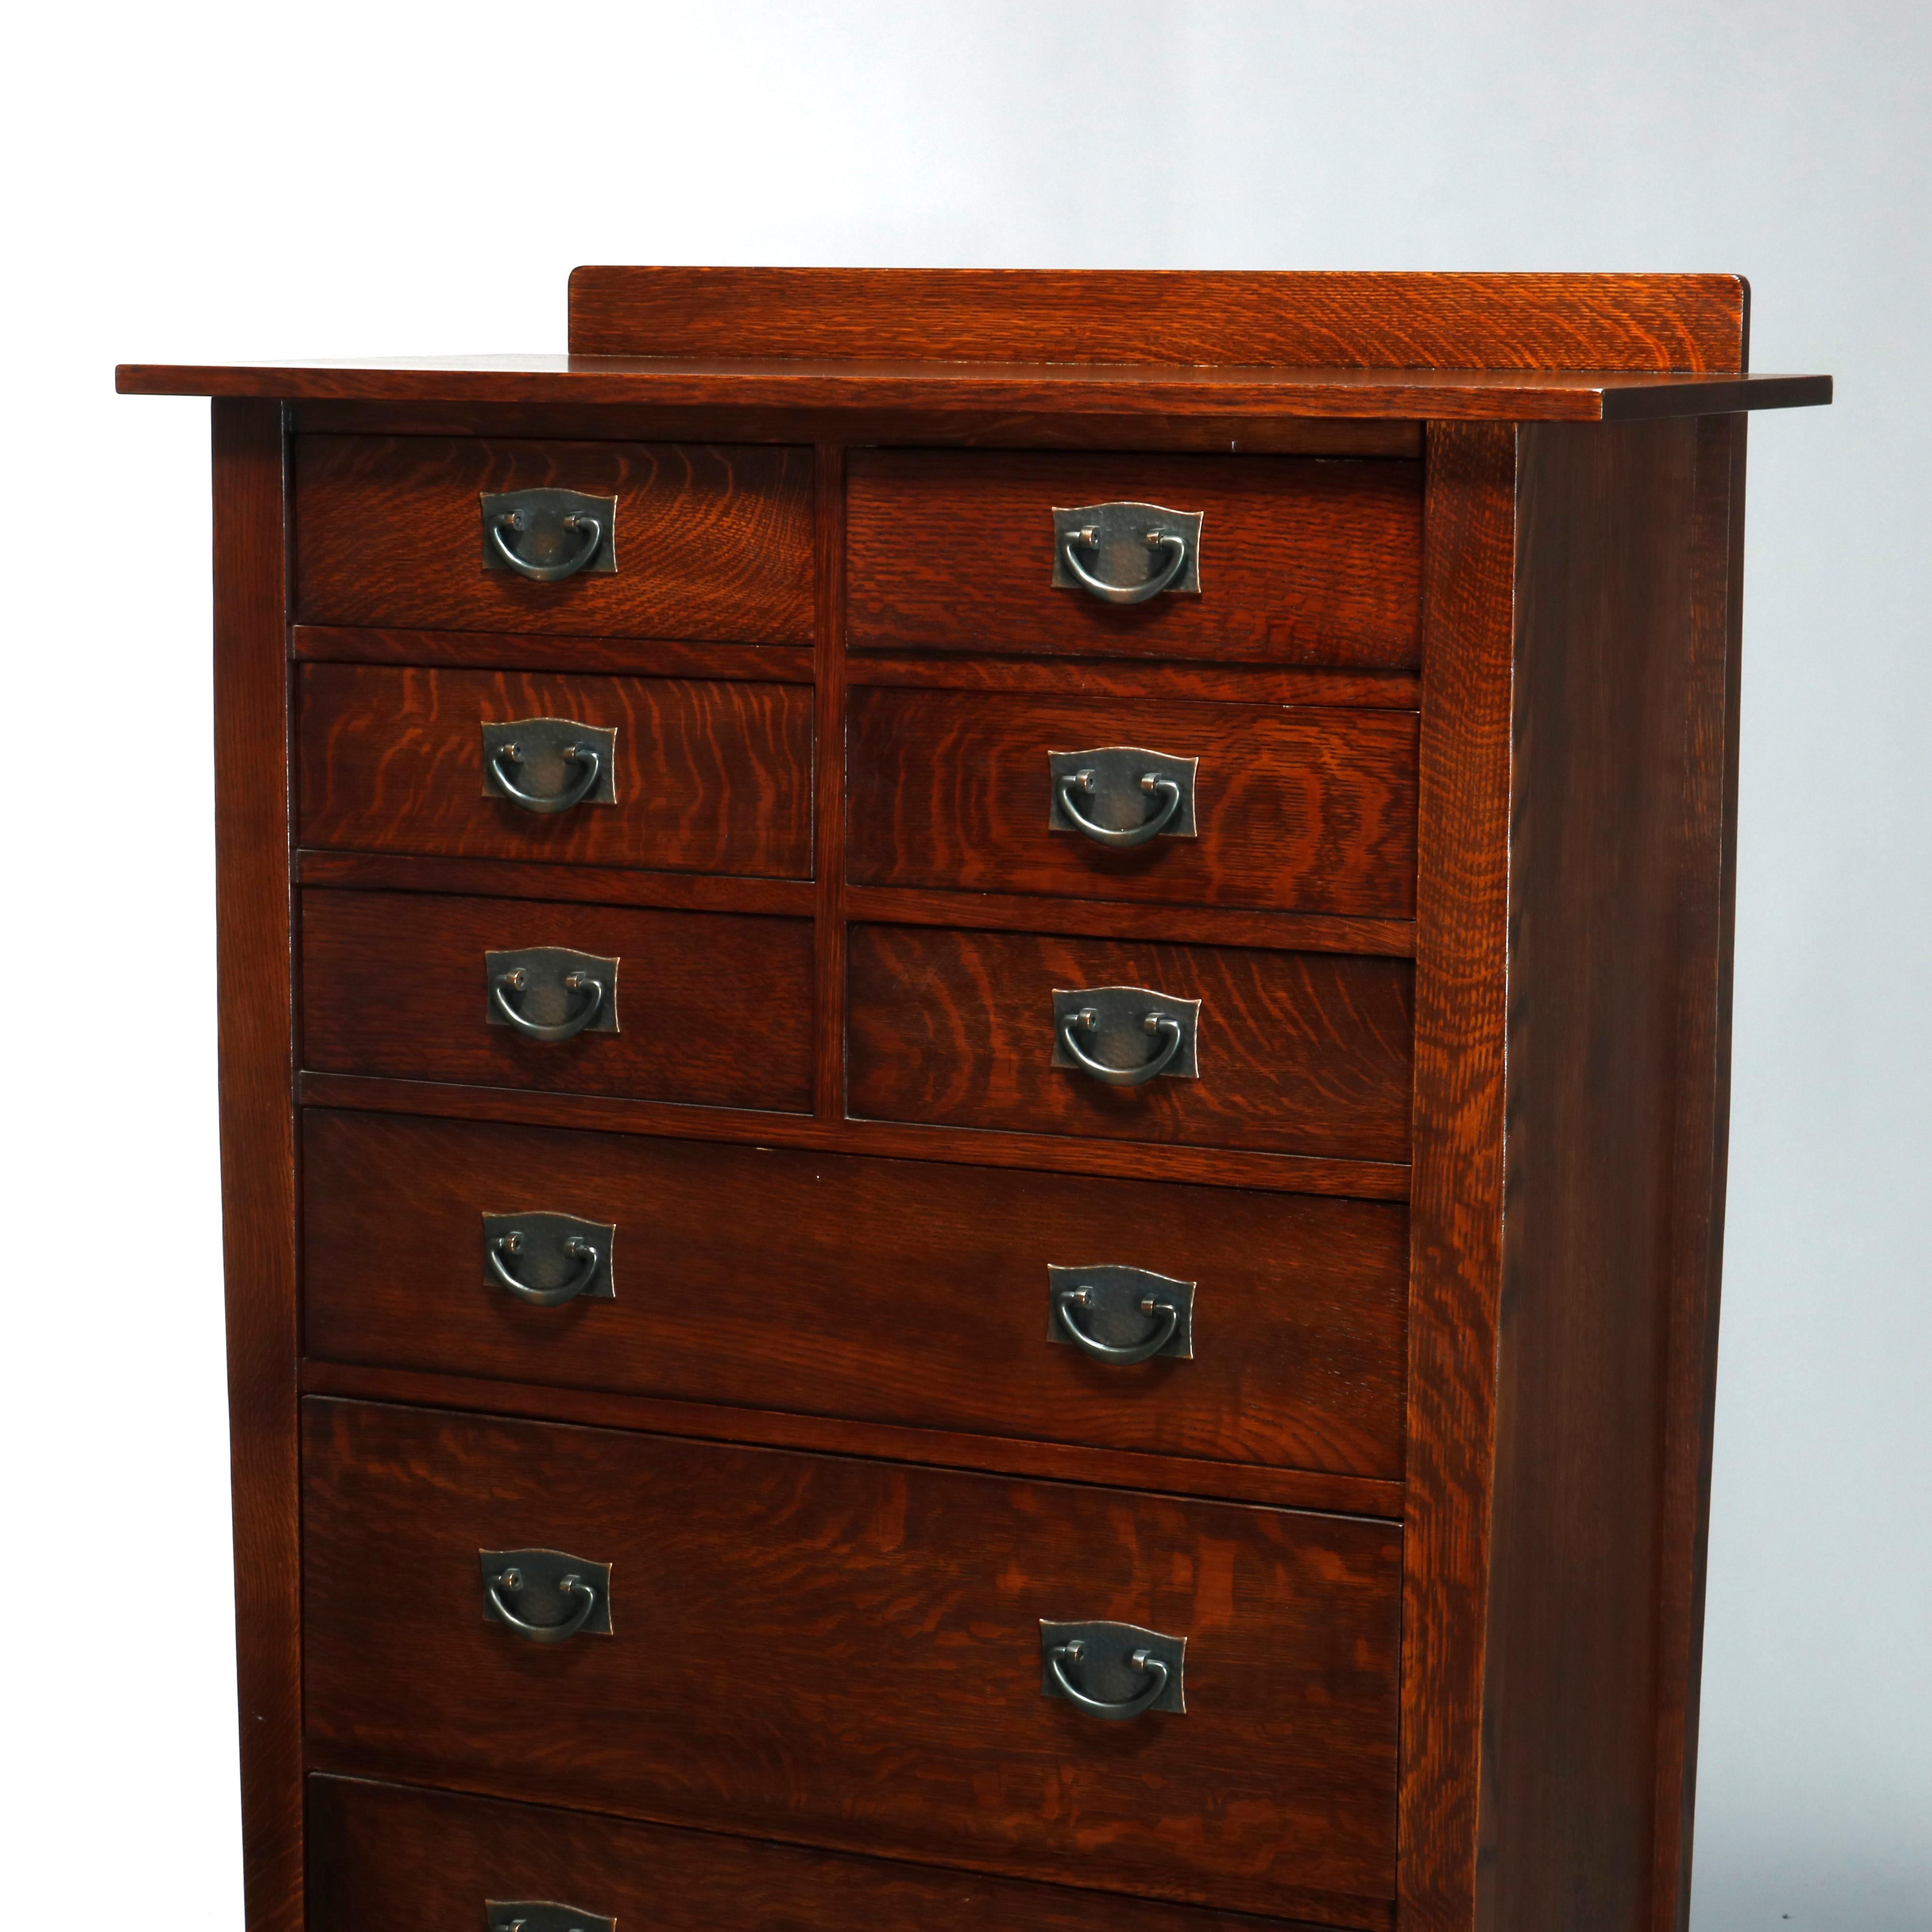 An antique Arts & Crafts mission high chest of drawers by Stickley after Harvey Ellis offers quarter sawn oak construction with backsplash surmounting six small drawers over three graduated long drawers, raised on straight and square legs and having